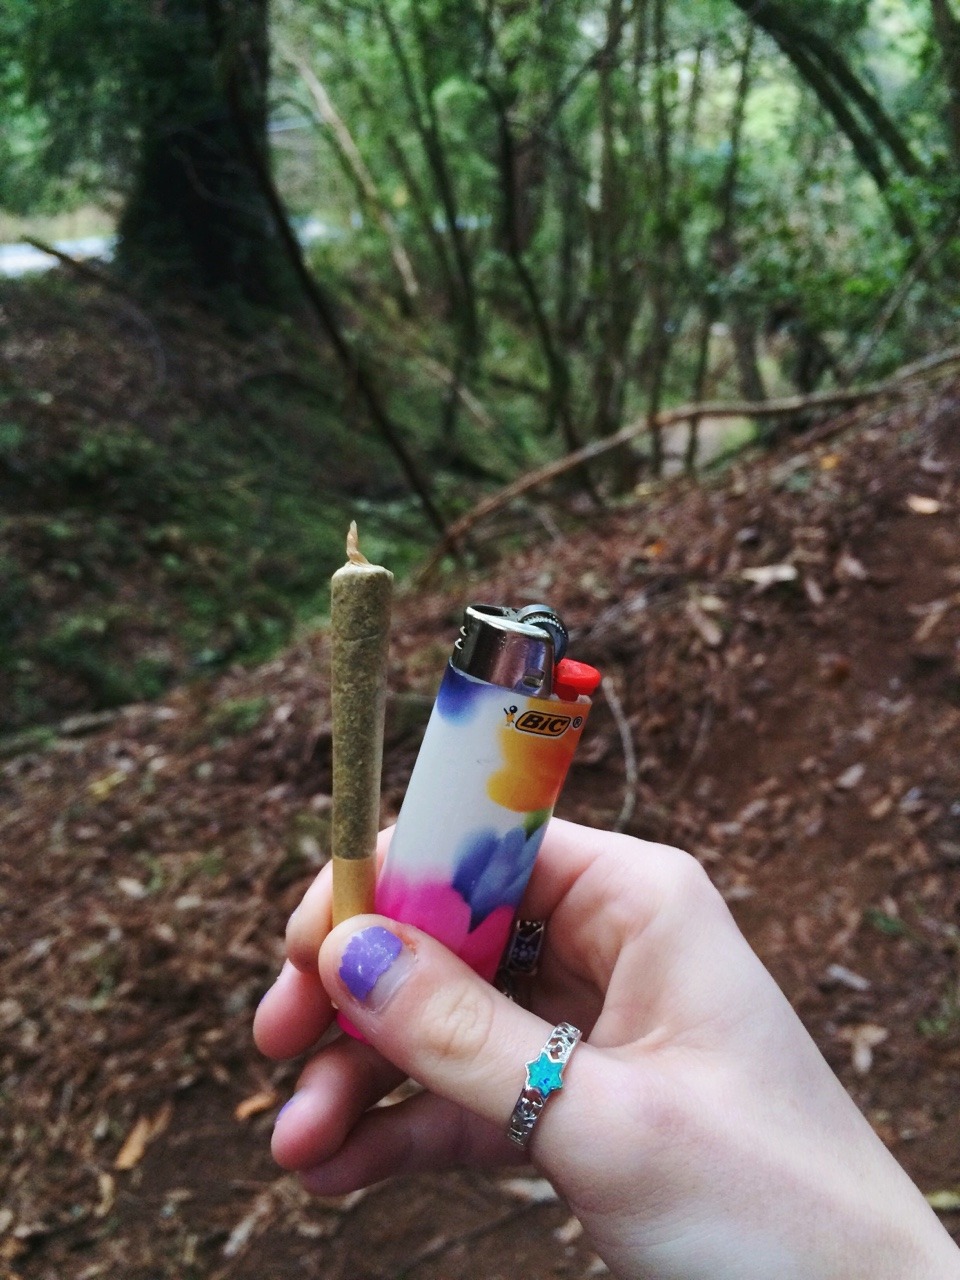 ellies-happy-mind:princessdabber:smoking on High Street again, packed some cherry